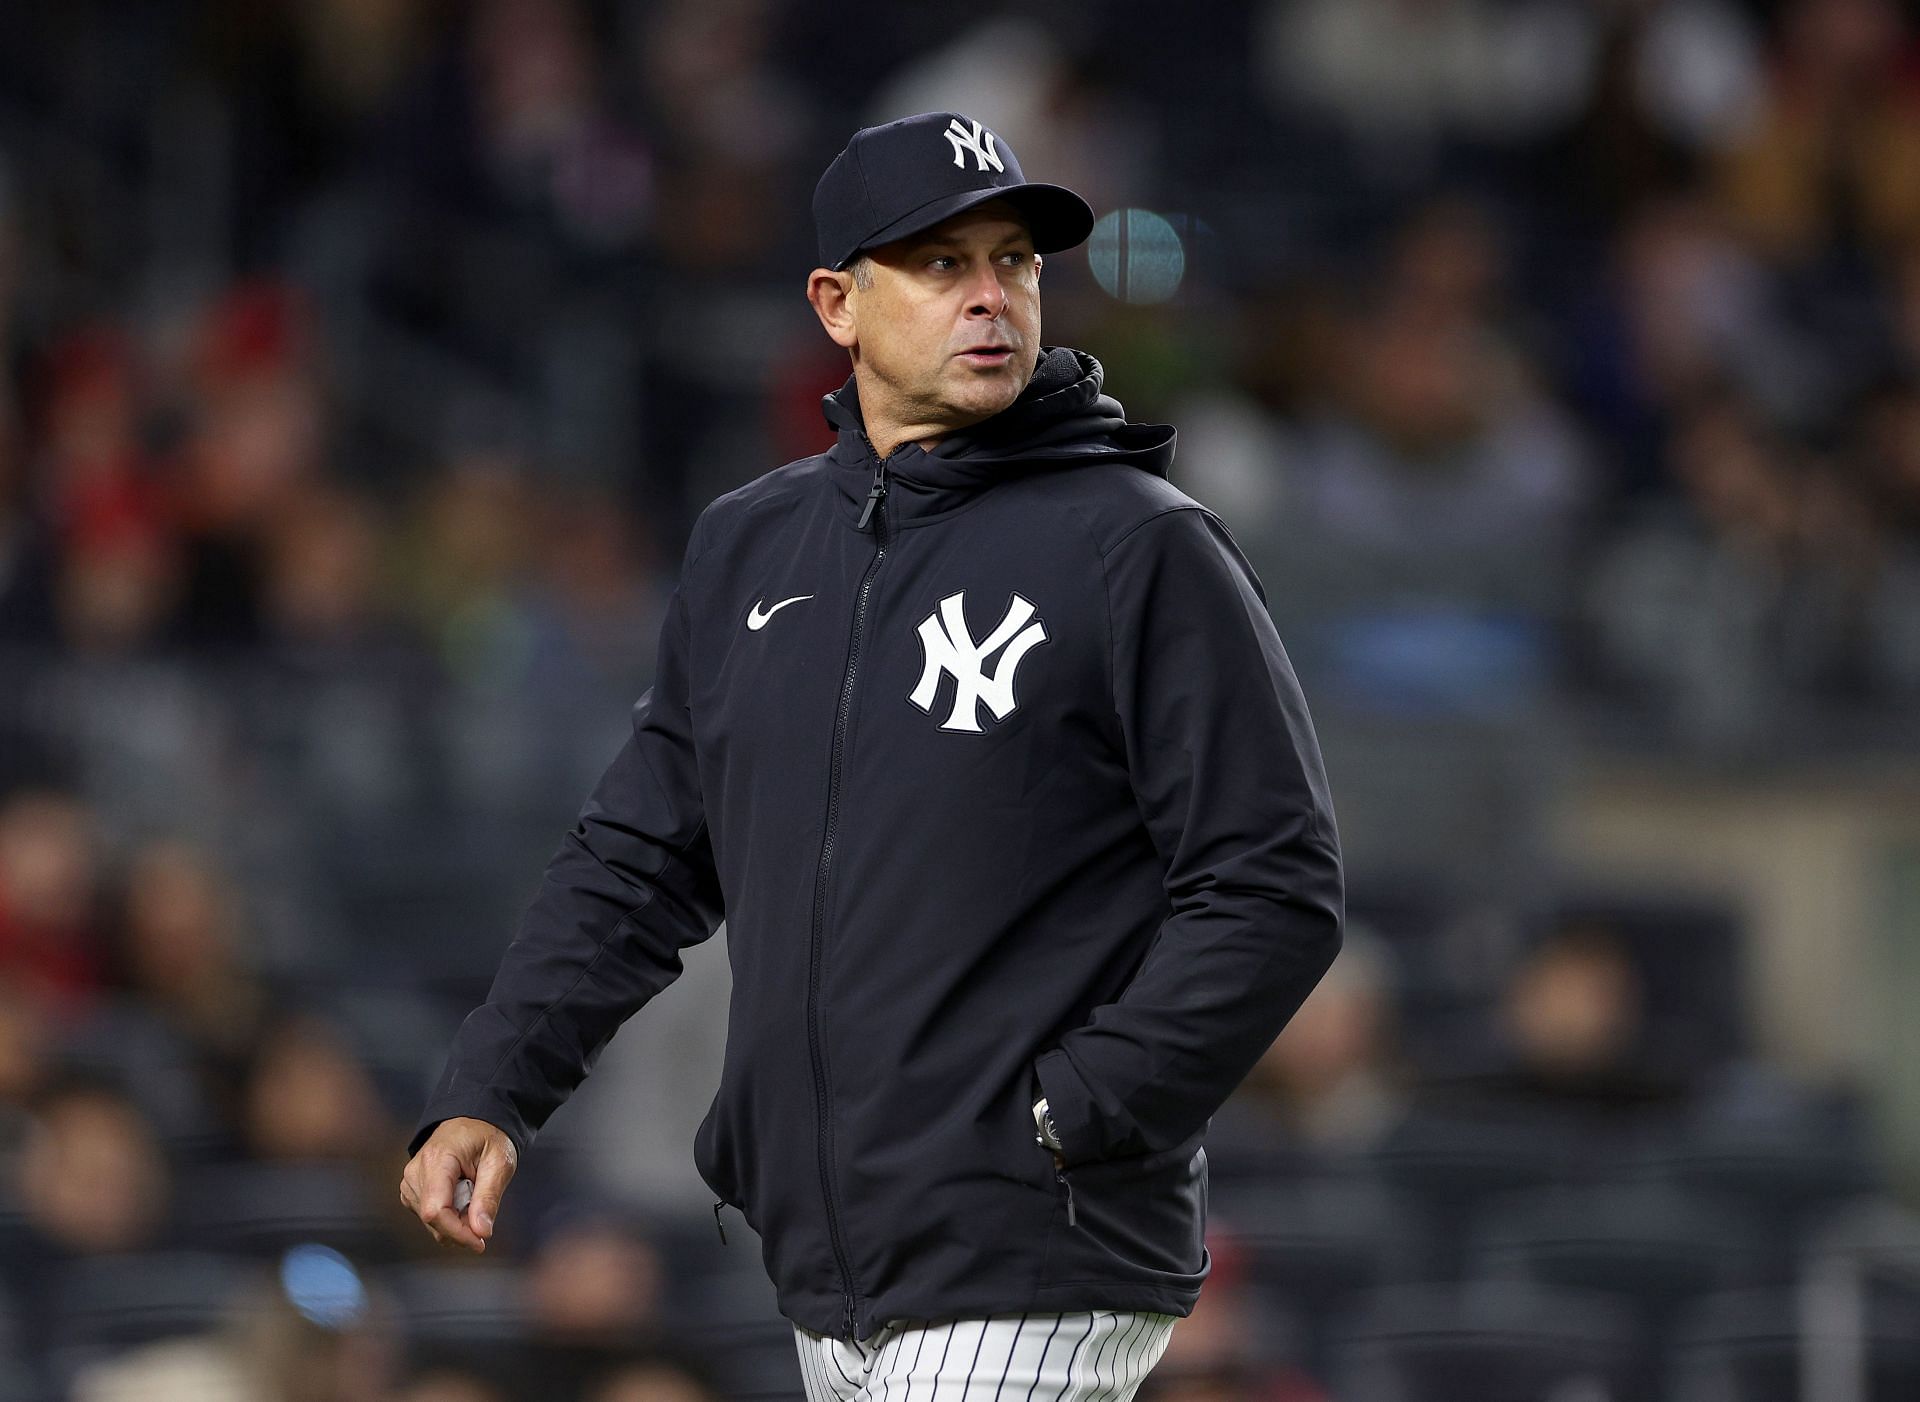 Manager Aaron Boone #17 of the New York Yankees walks back to the dugout